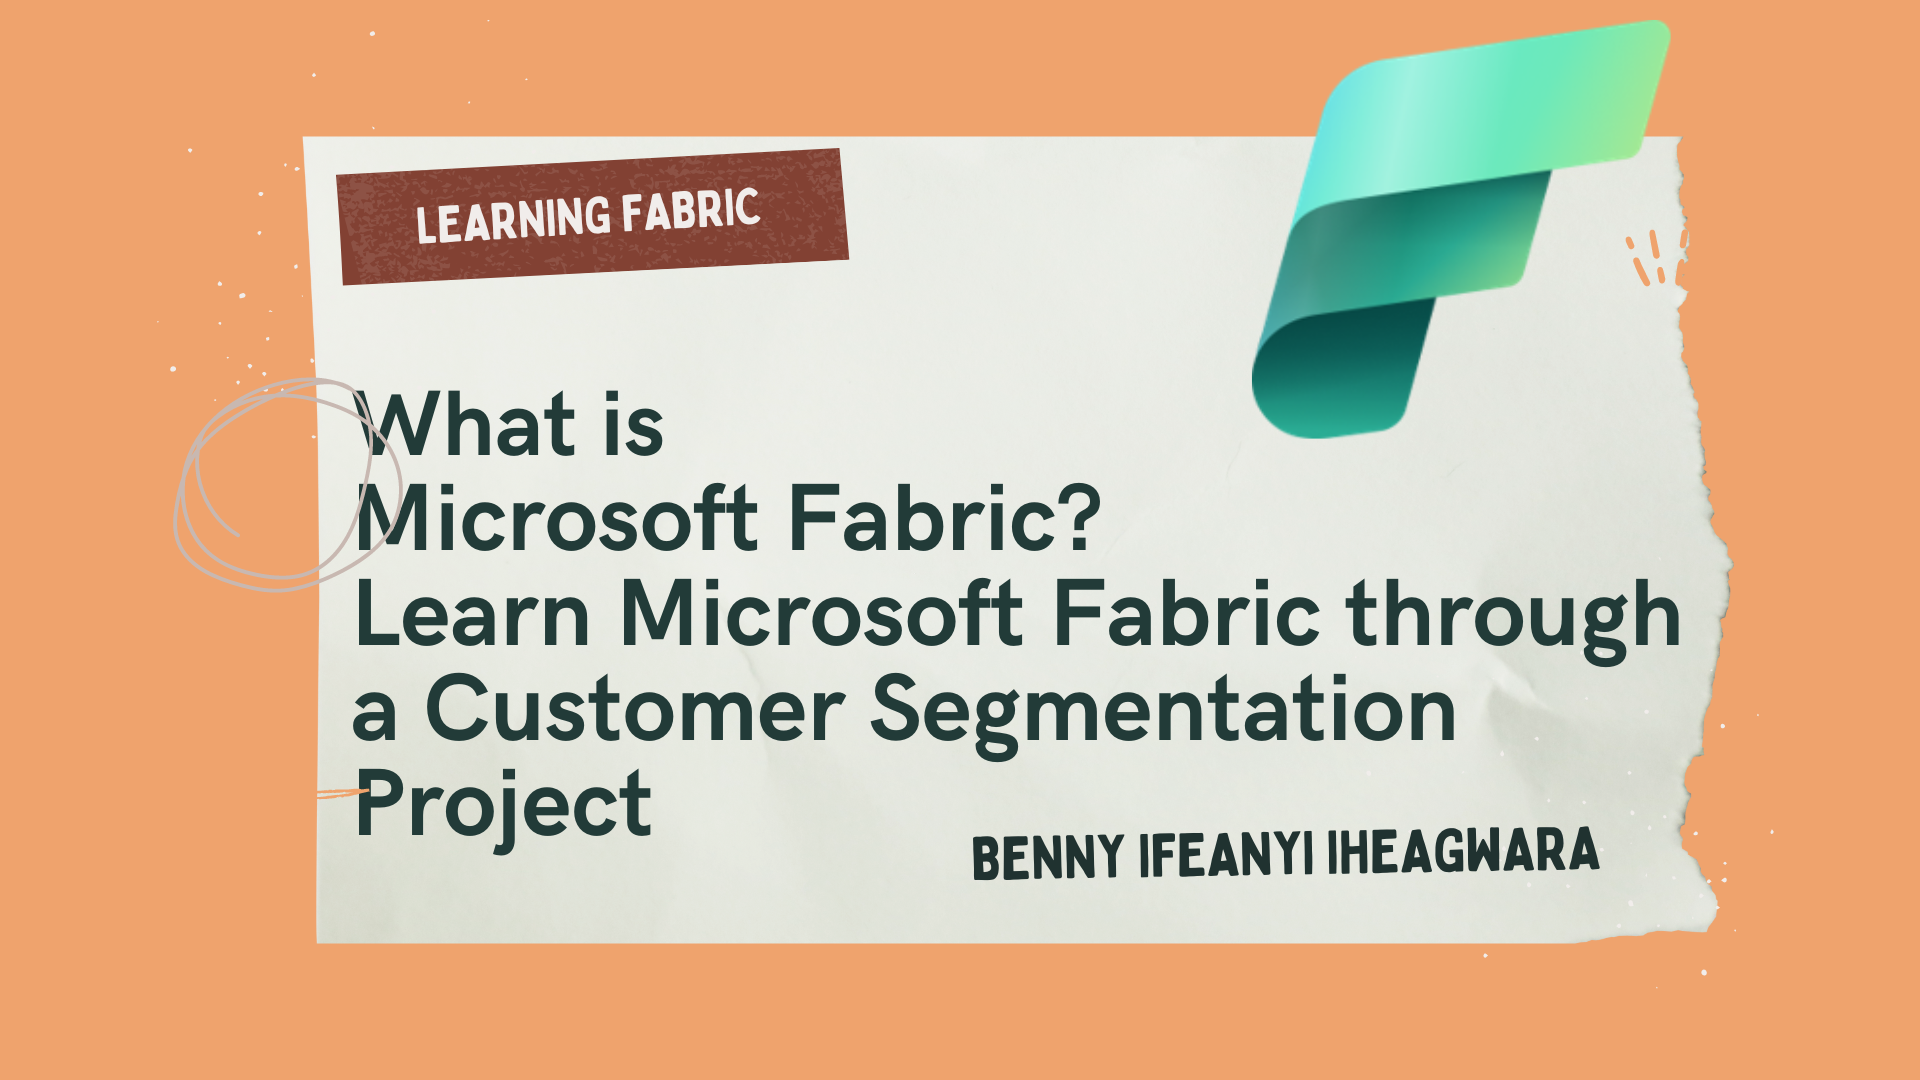 What is Microsoft Fabric? How to Build a Customer Segmentation Project